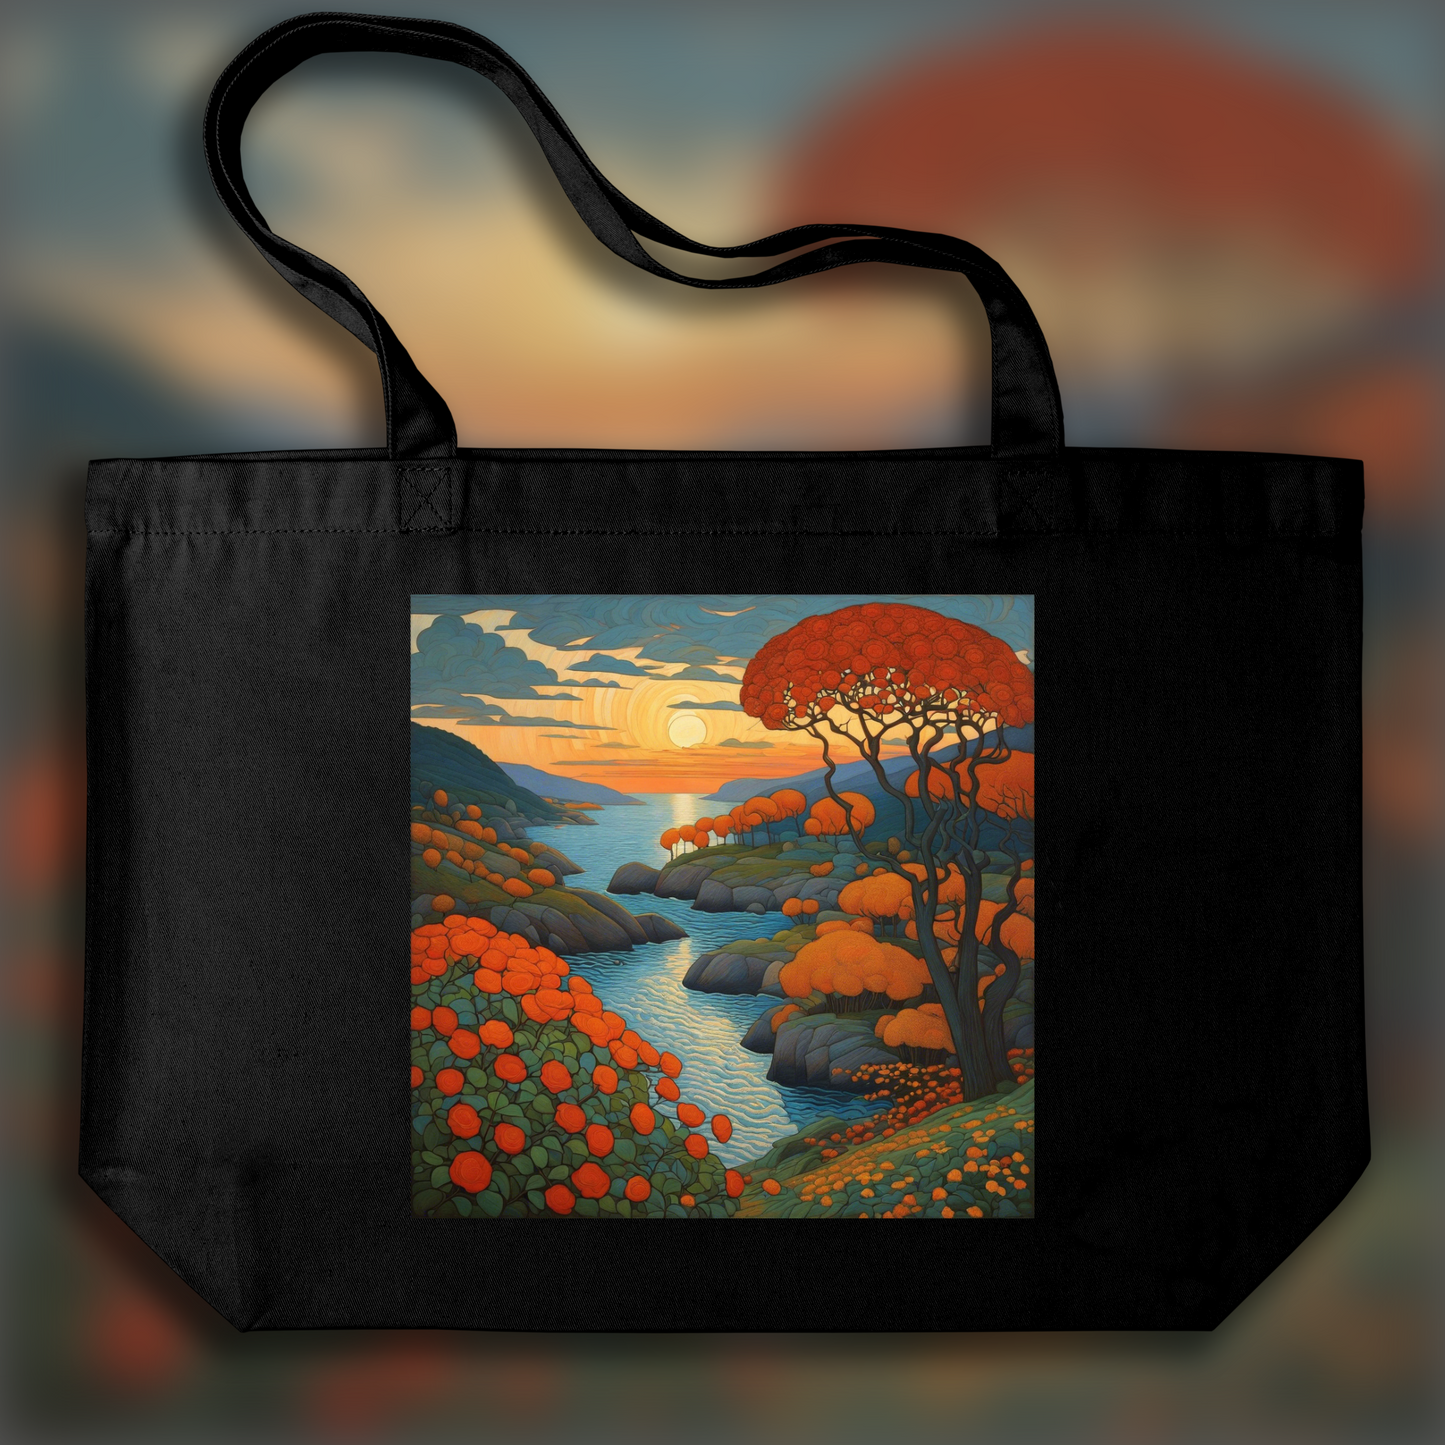 Tote bag - Georges Lacombe, Venis flowers  - 594340720